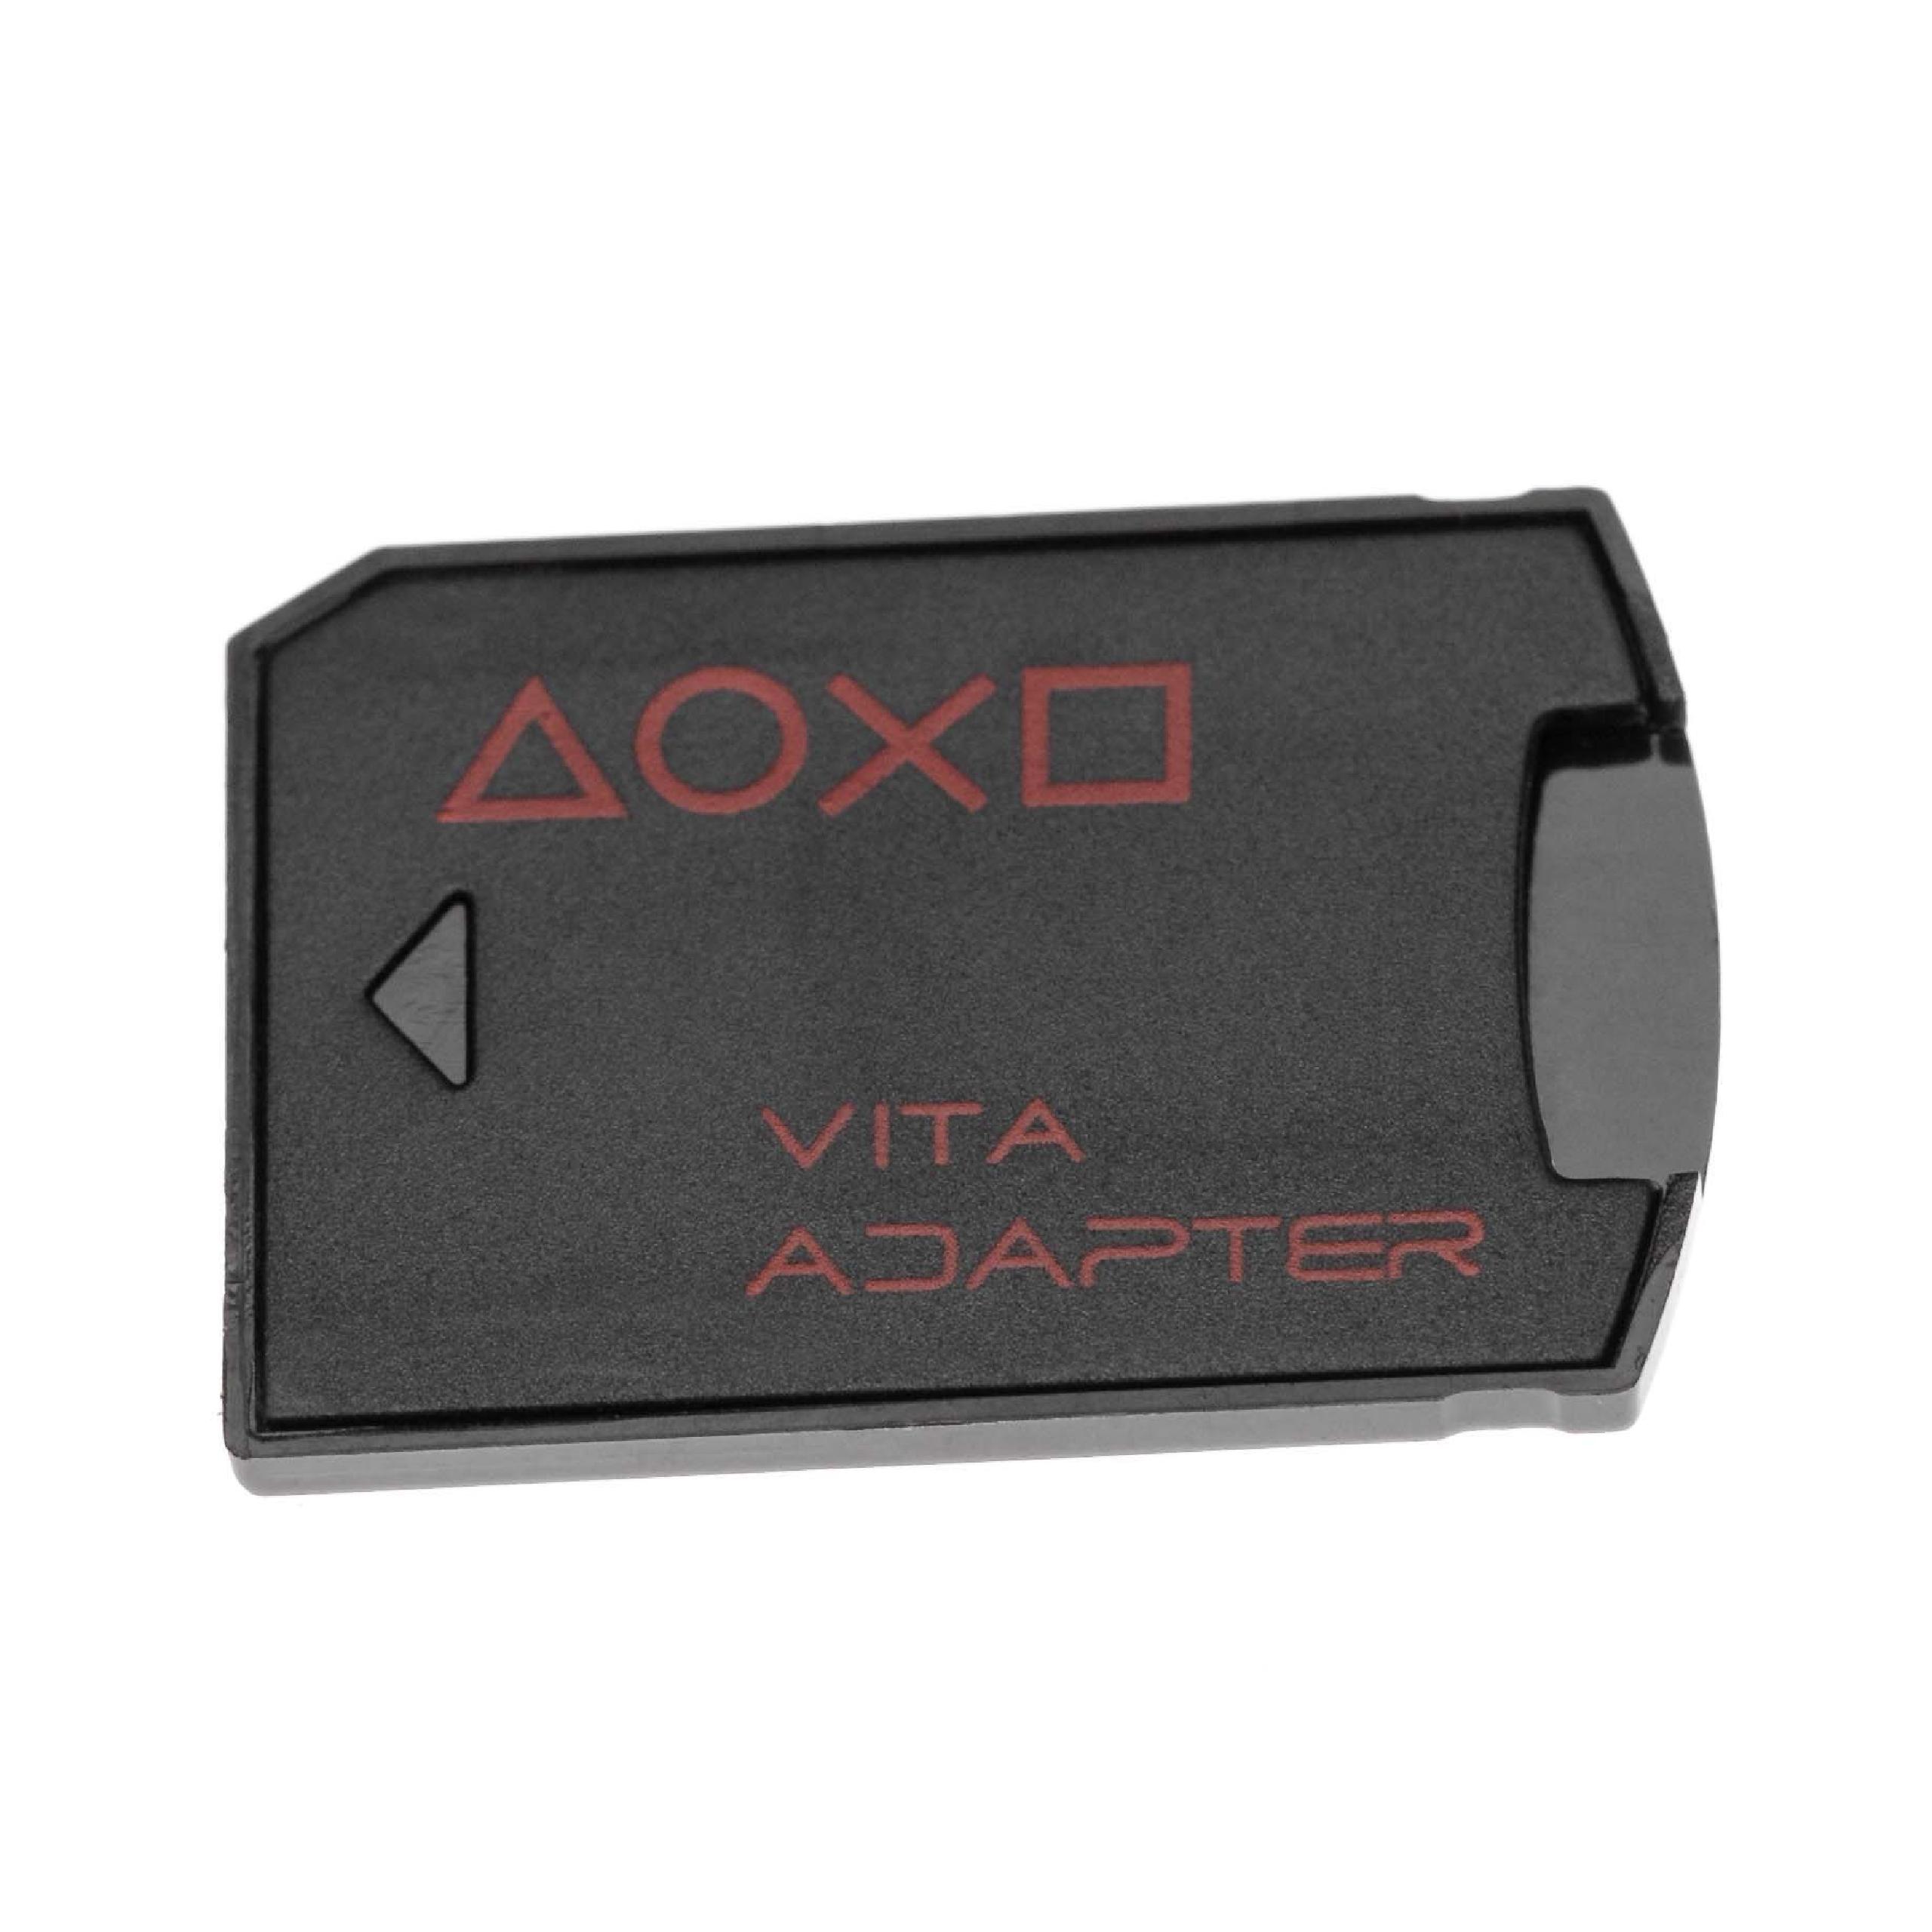 SD Card Adapter replaces SD2VITA Pro, SD2VITA for PlayStation game console - SD Memory Card Converter, black